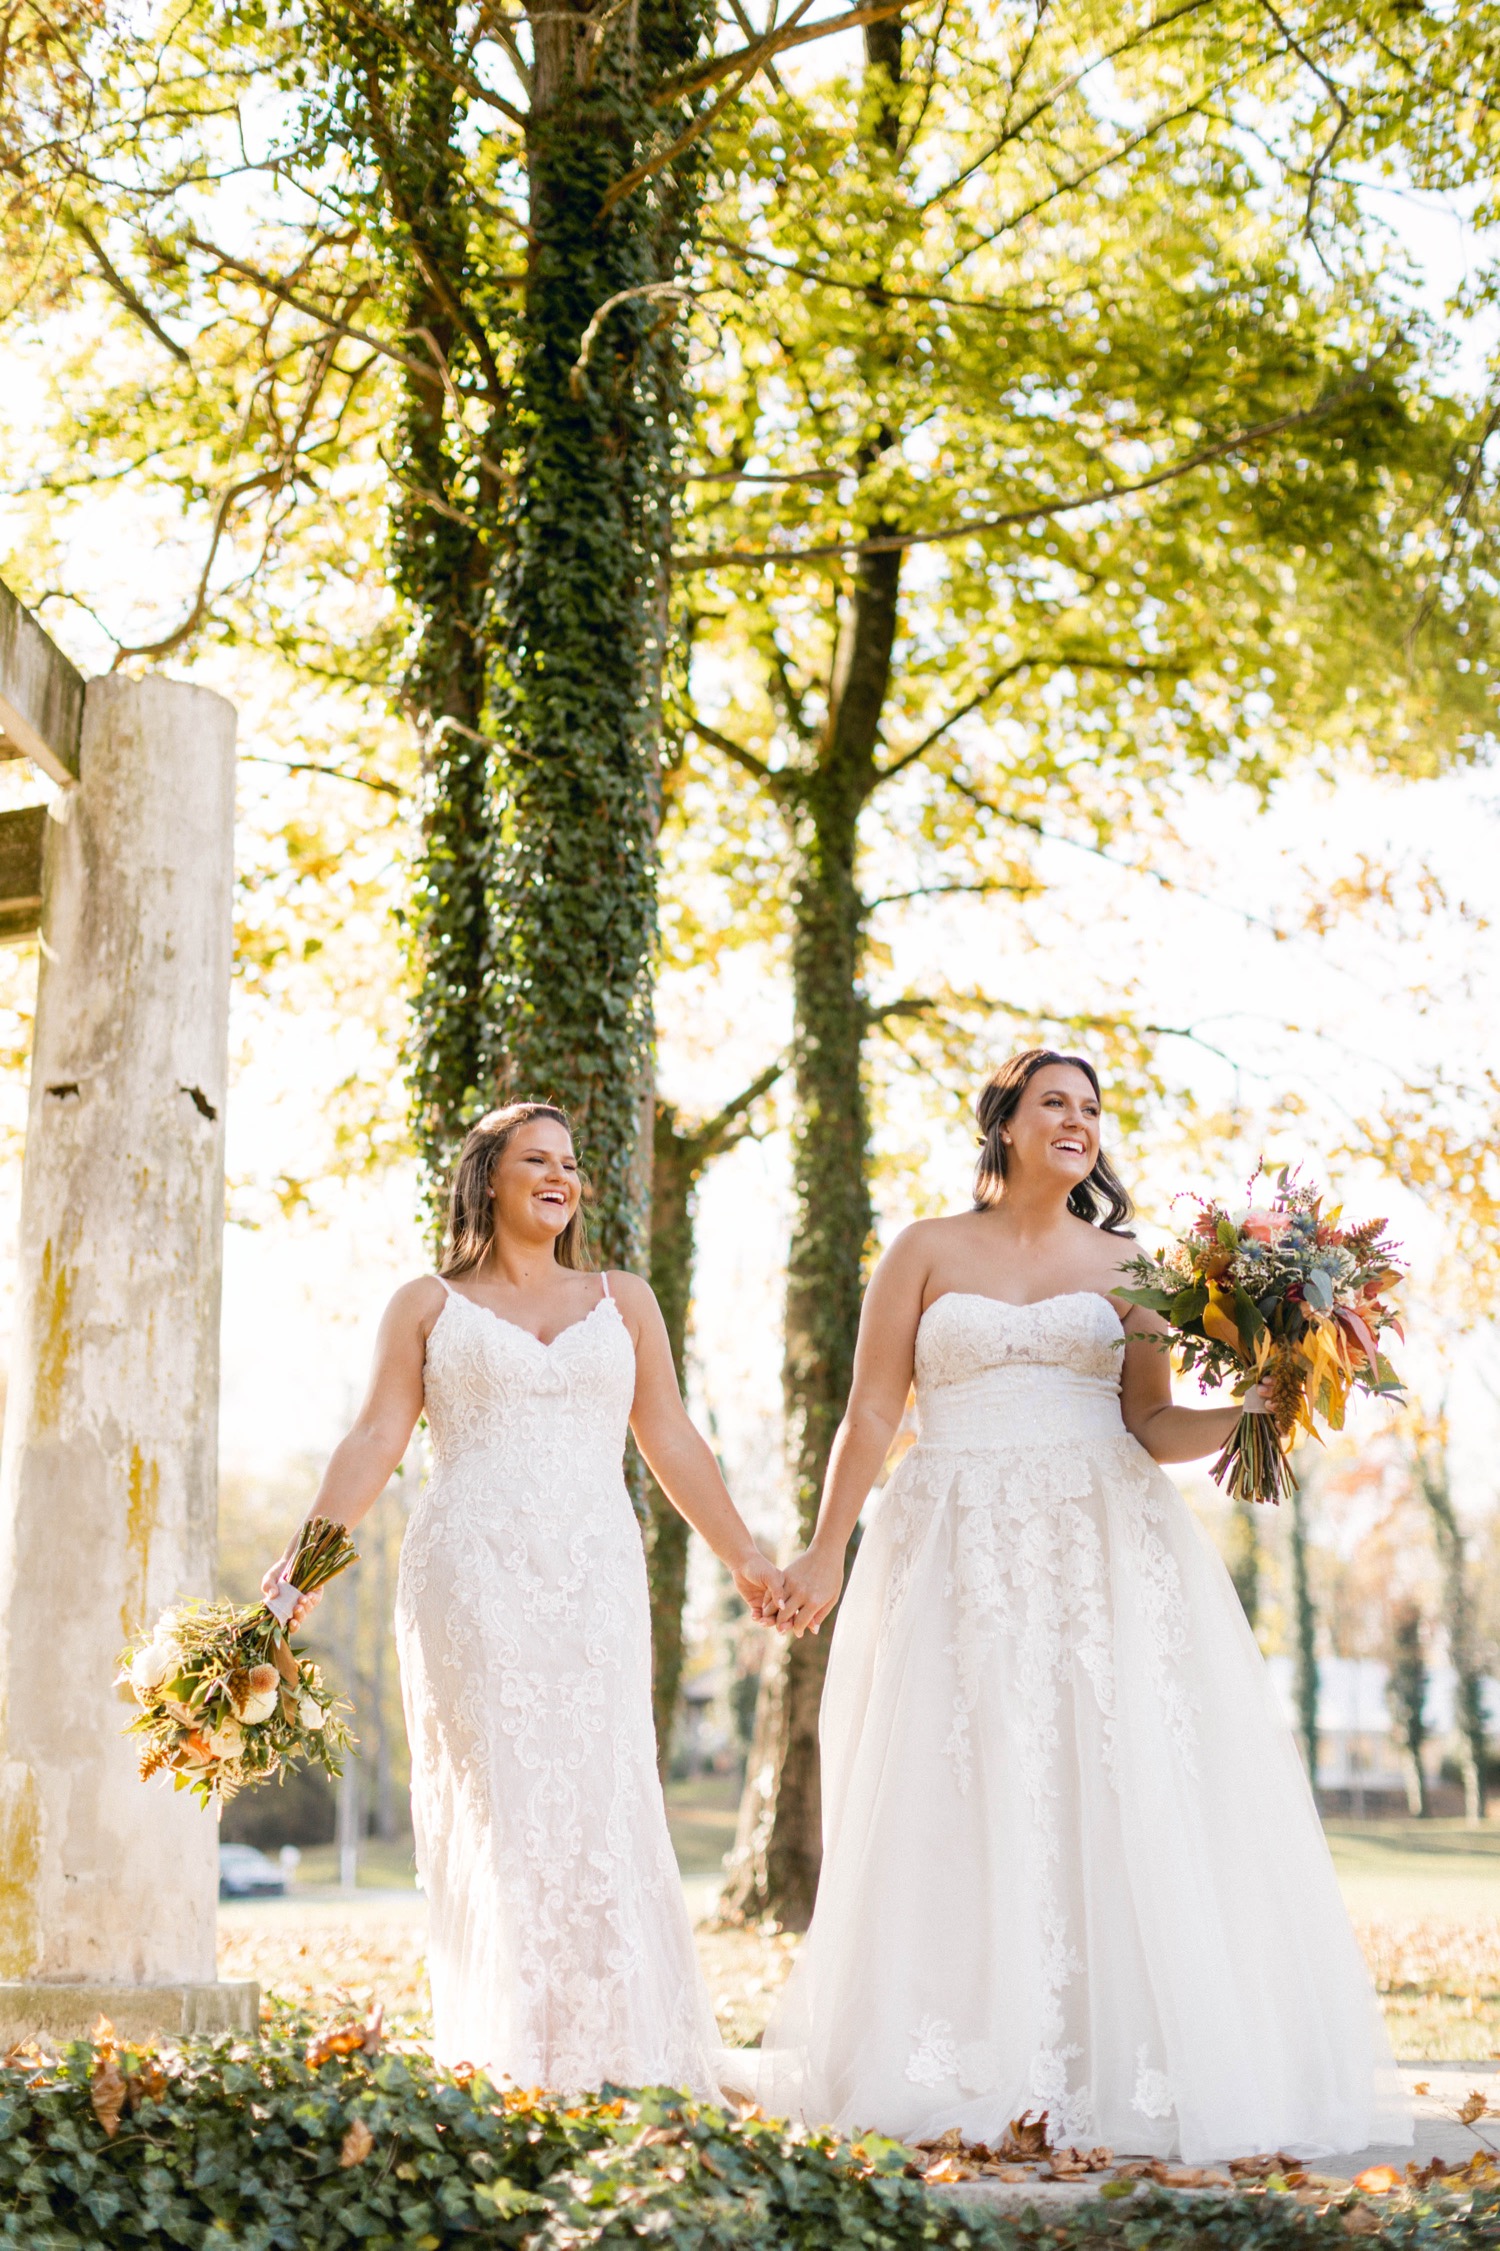 brides with fall bouquets in woodsy outdoor wedding